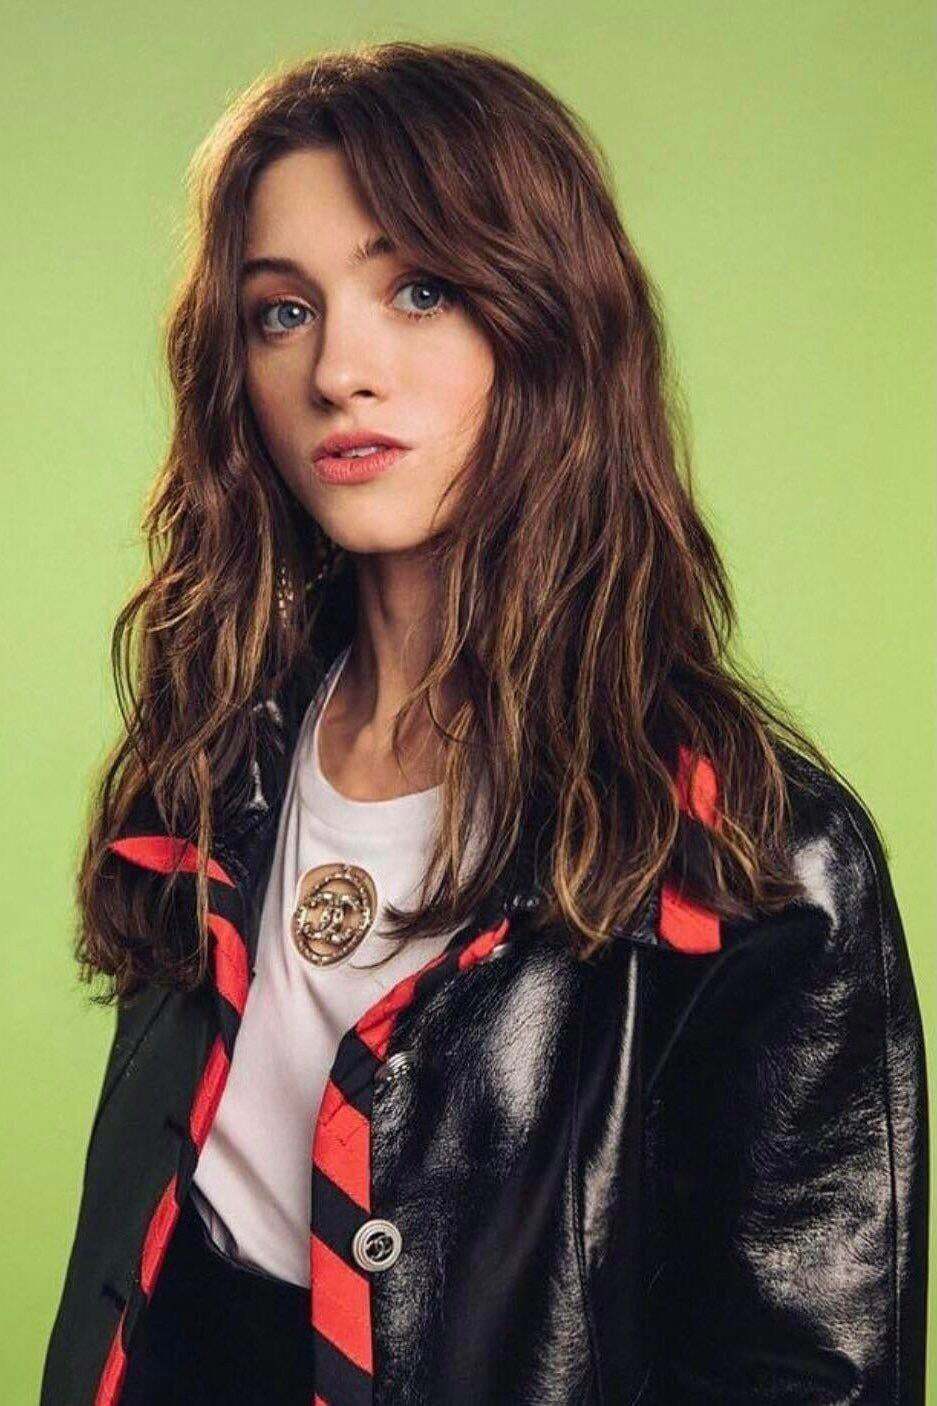 Fucking Natalia Dyer silly would be the dream